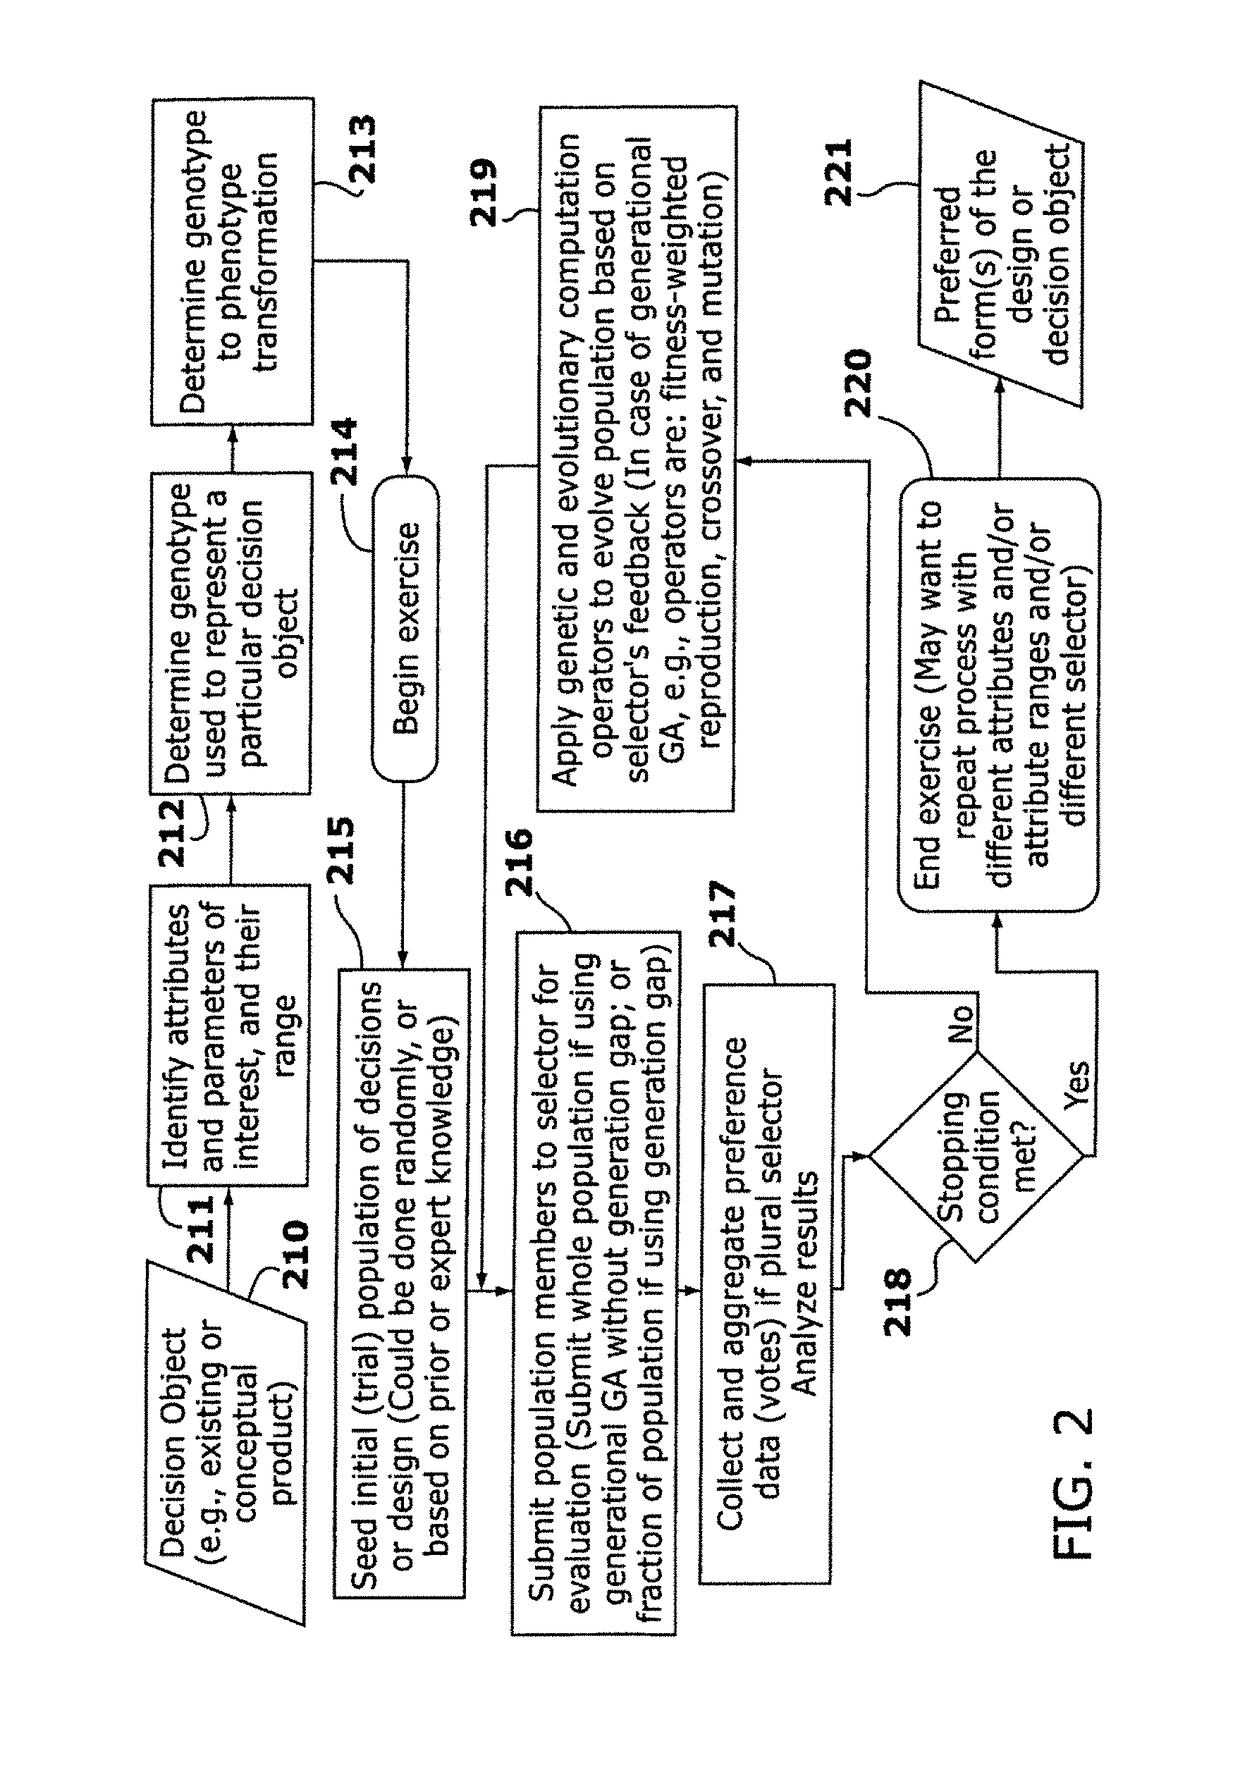 Method and apparatus for interactive evolutionary optimization of concepts